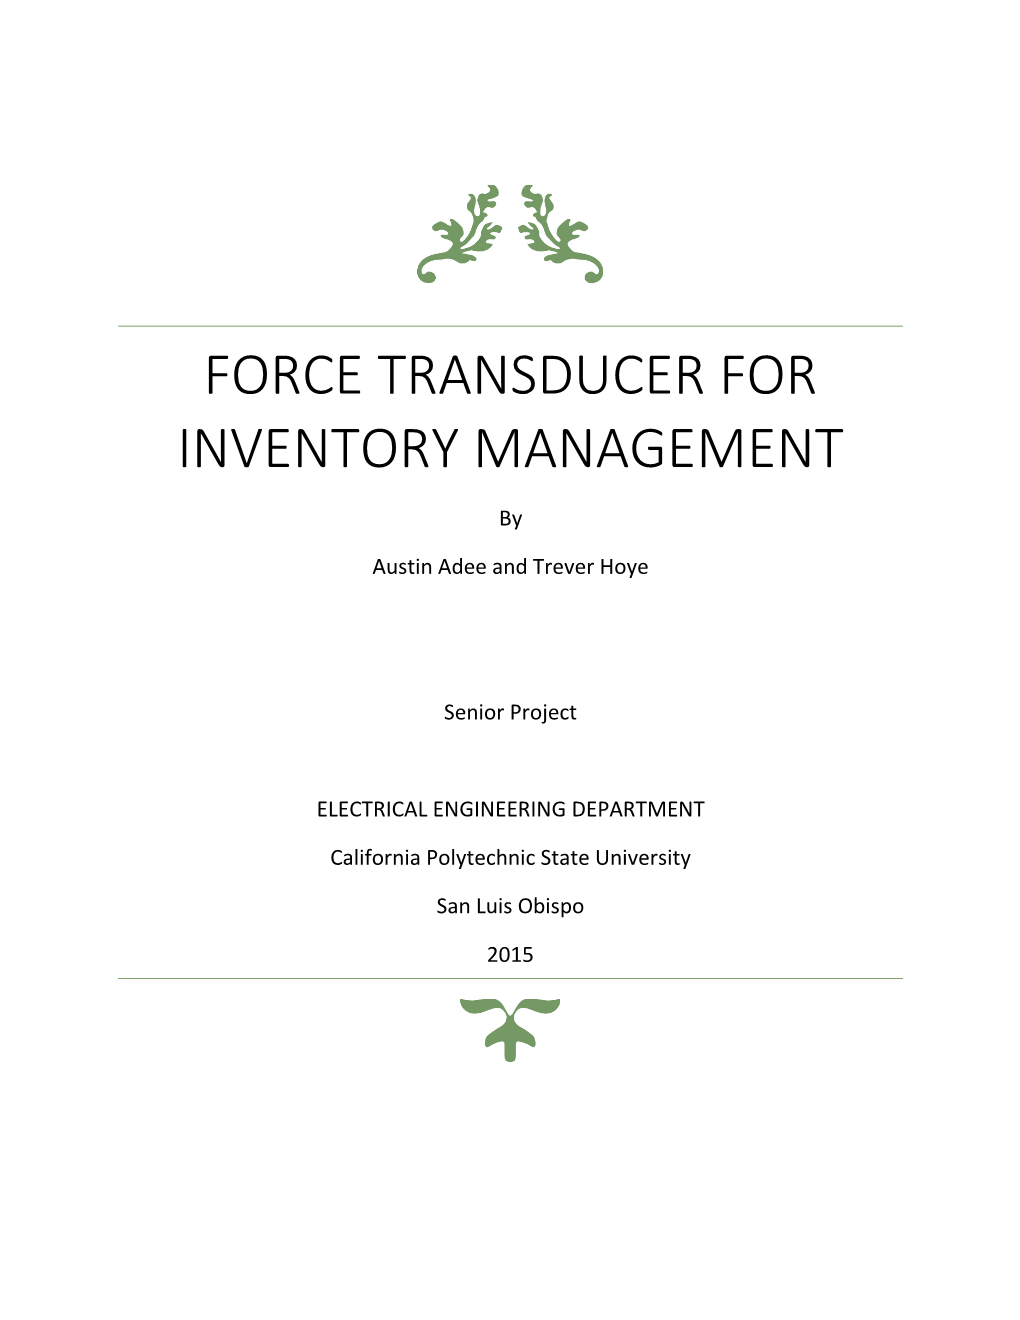 Force Transducer for Inventory Management